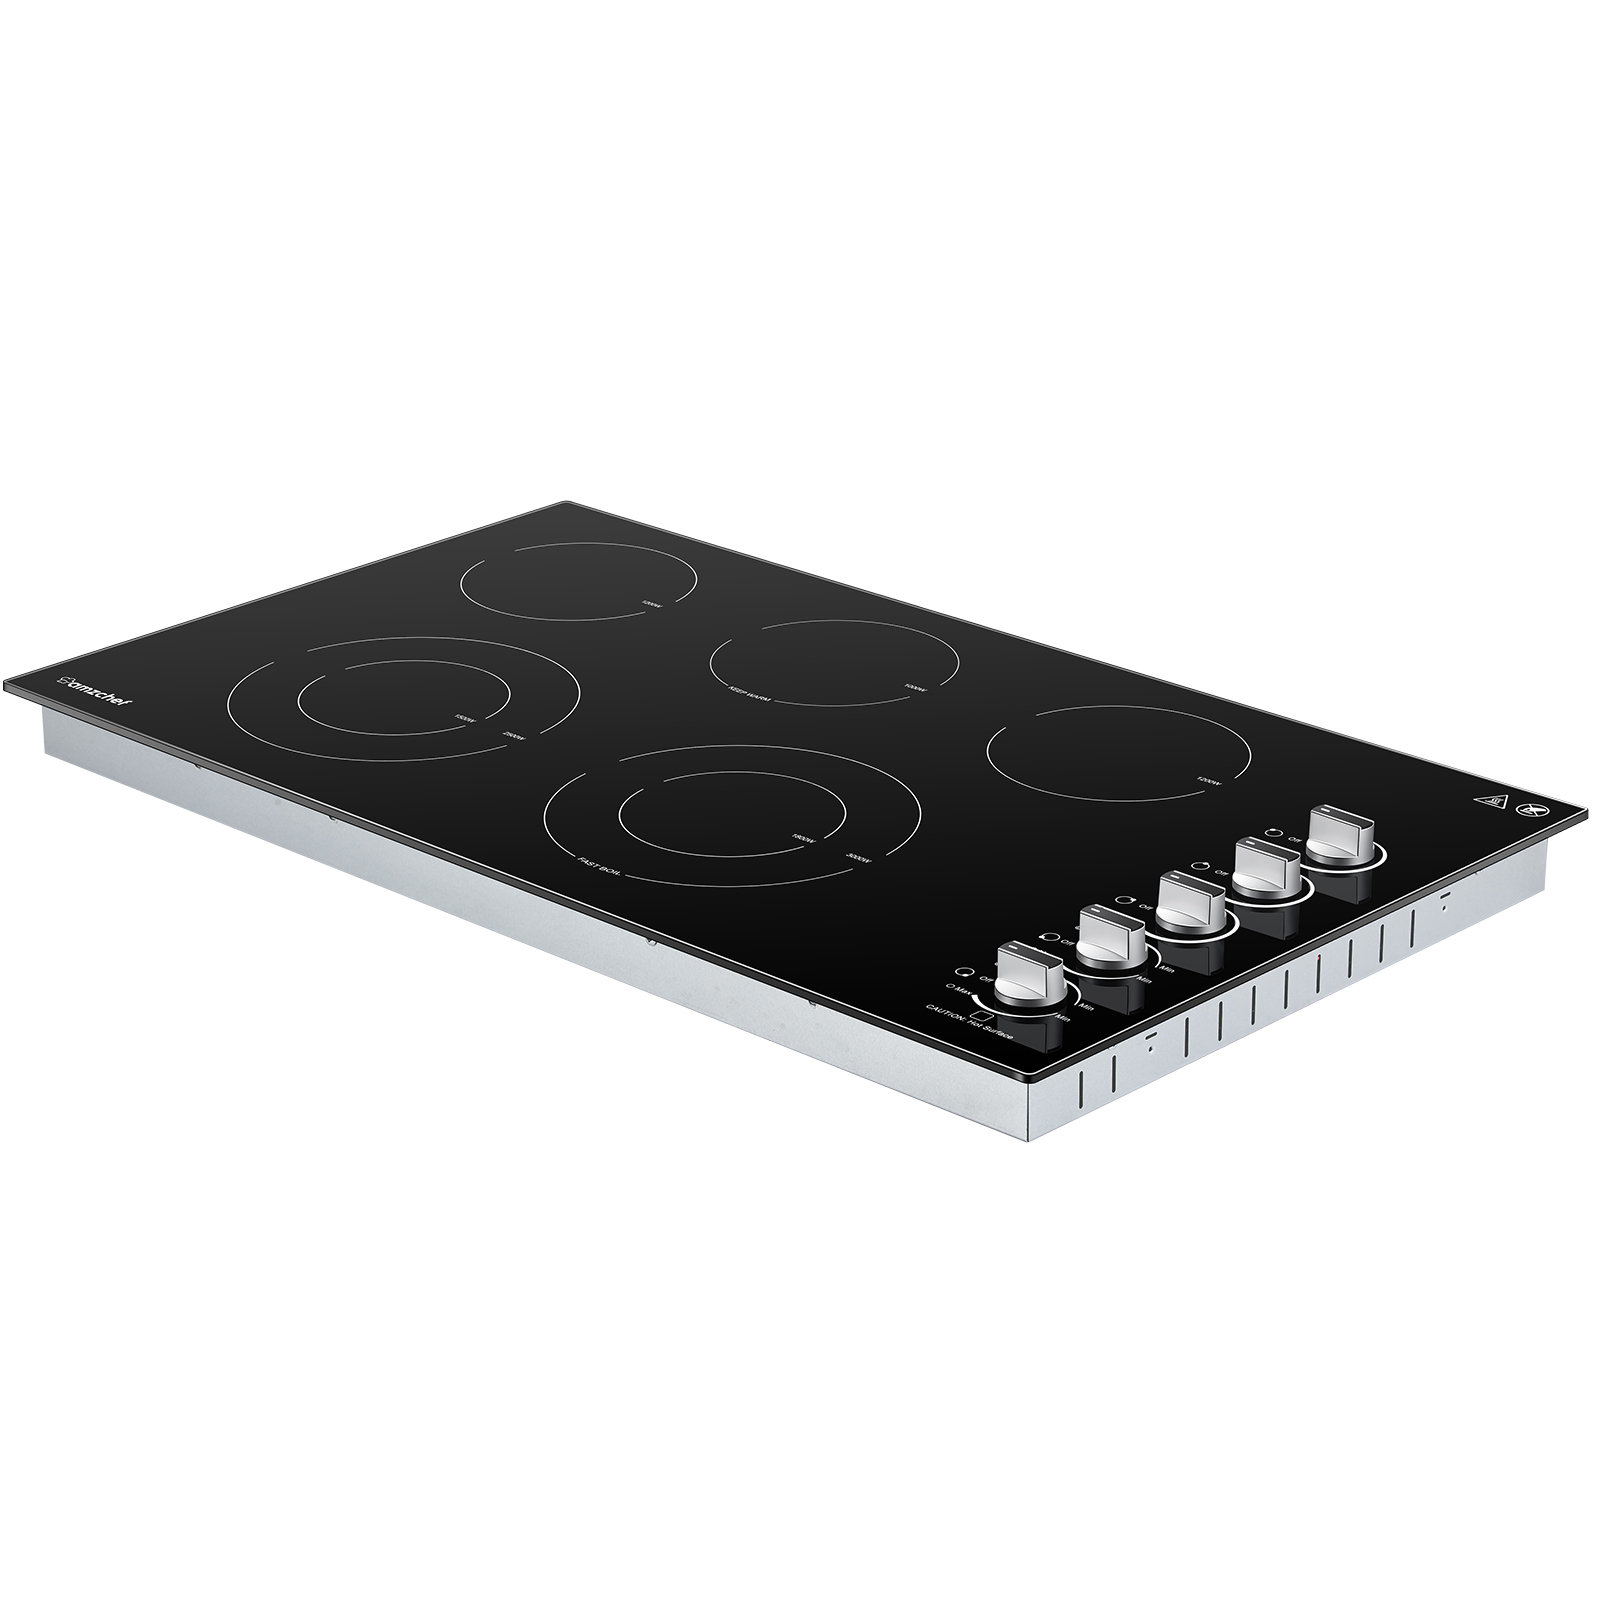 Frigidaire 36'' Built-In Induction Cooktop in Black